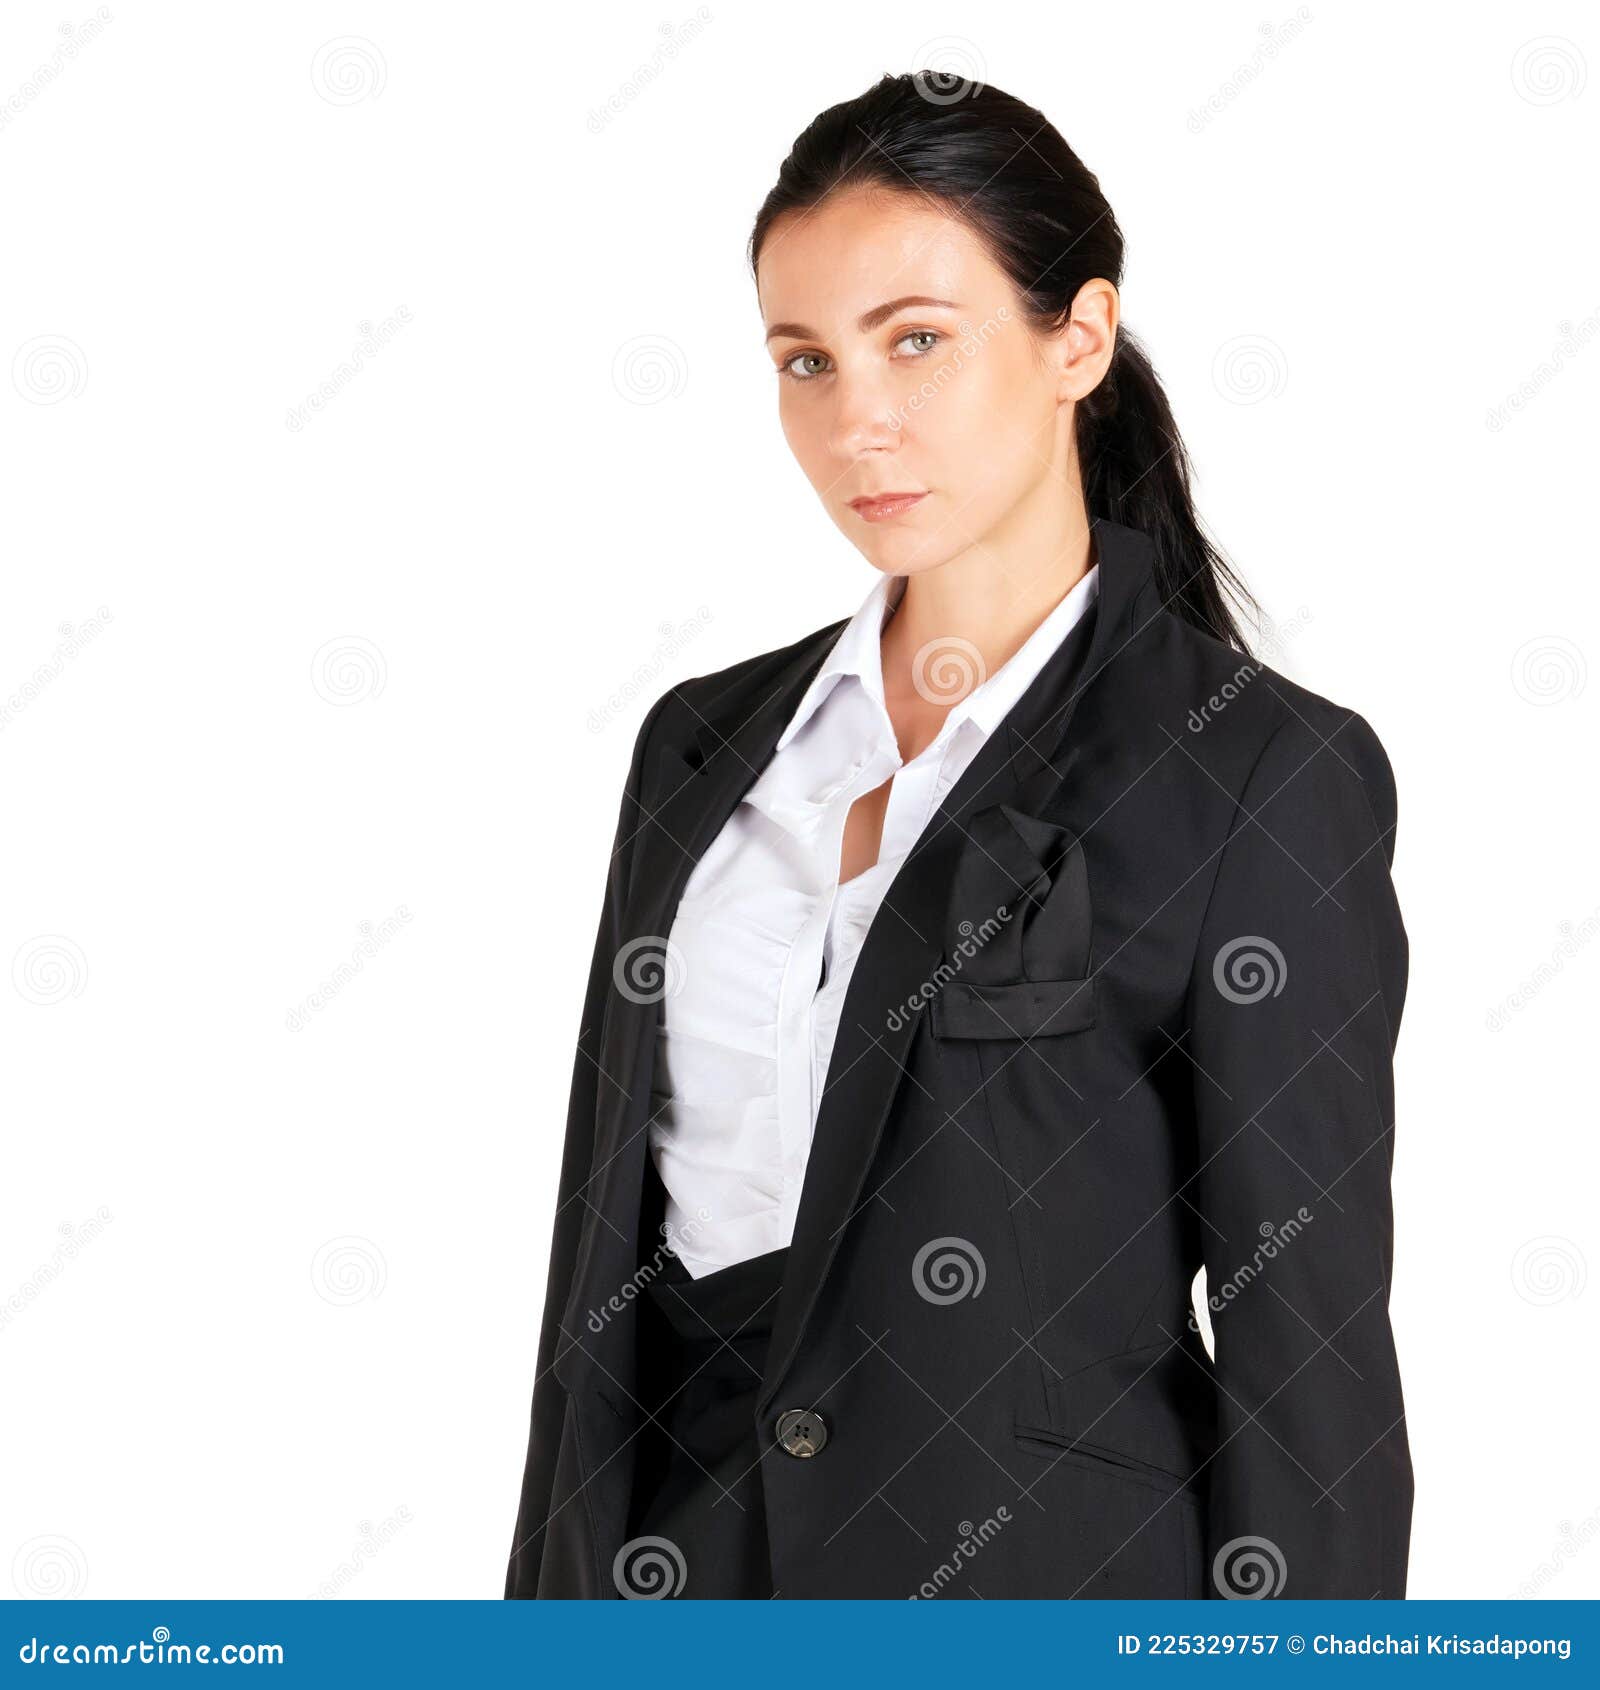 young cauasian business woman in white shirt and black suit standing in a white photography scene. portrait on white background